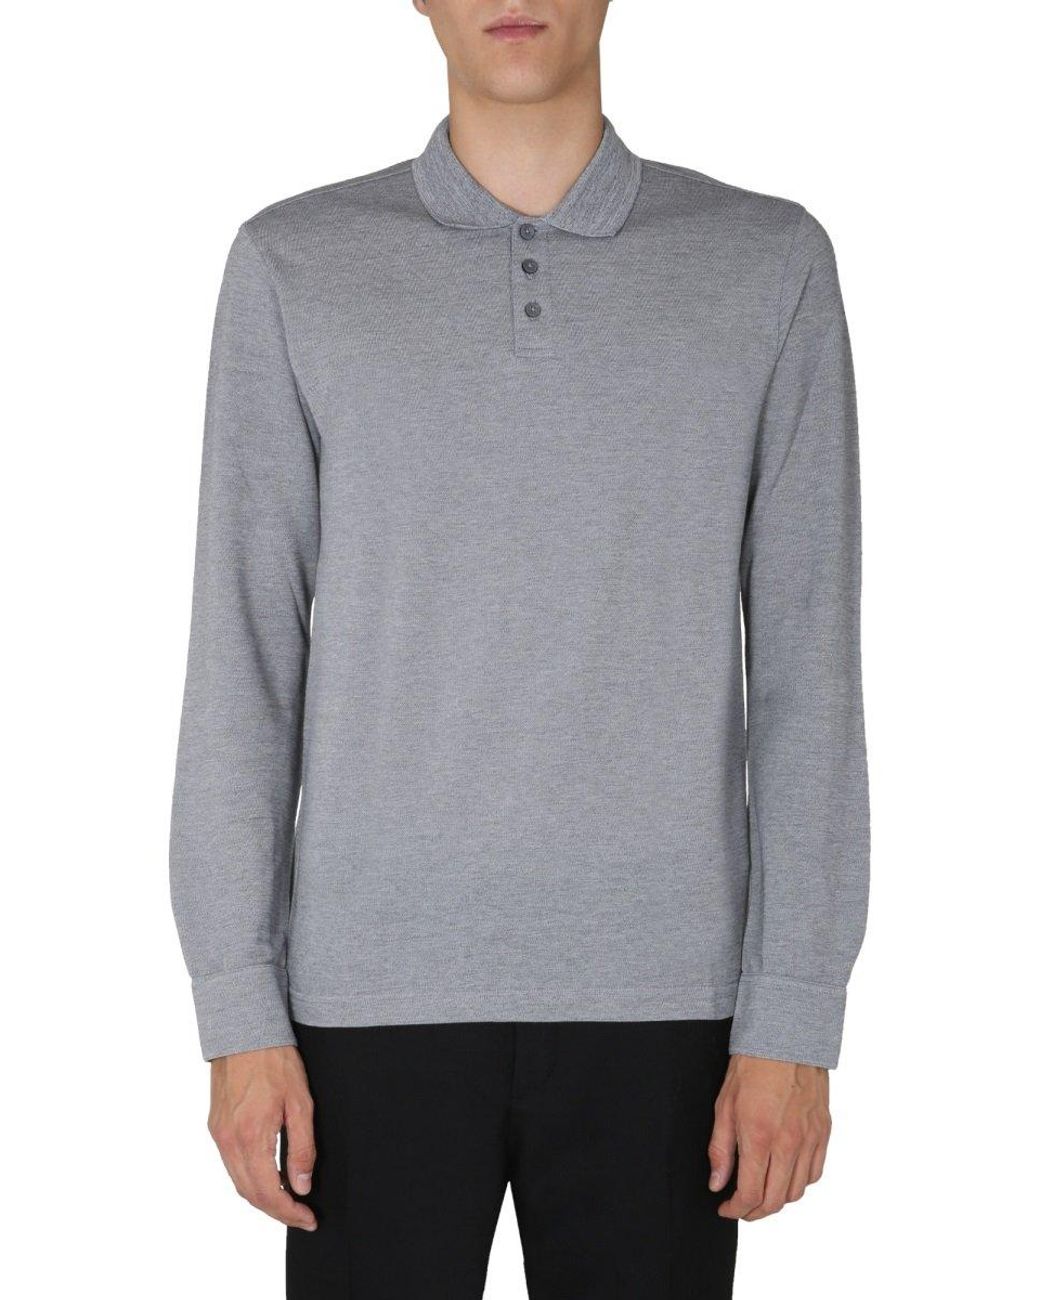 Z Zegna Wool Regular Fit Polo in Gray for Men - Lyst